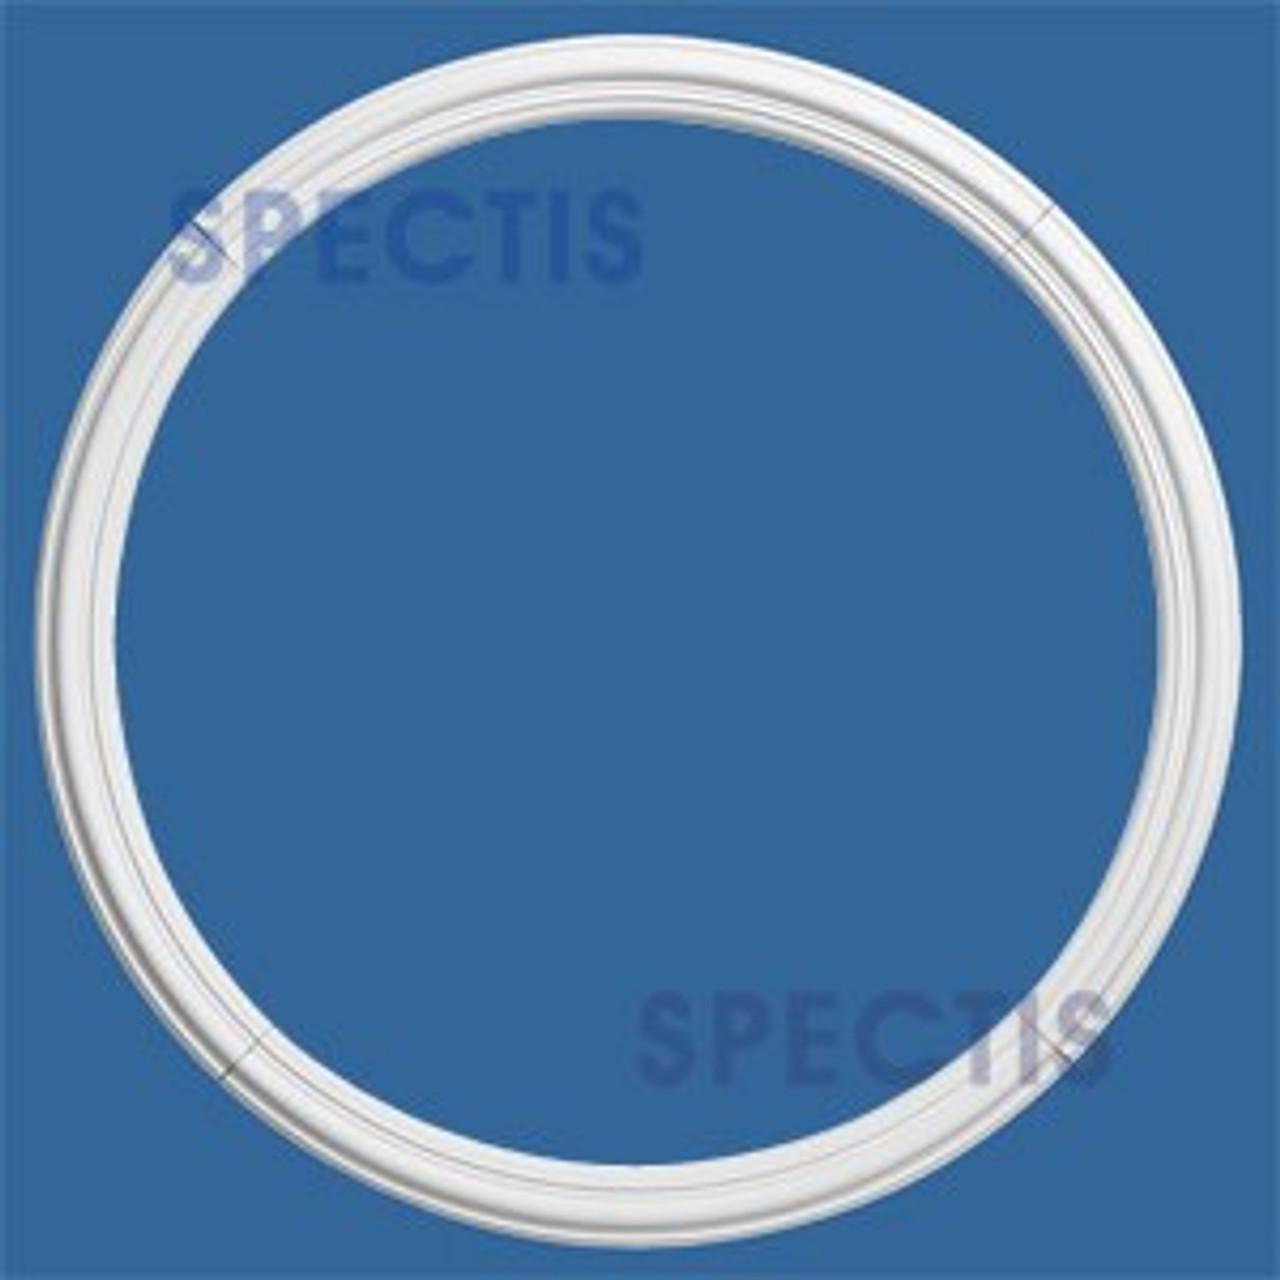 Sterling Seal OR90CLRURE449X10 449 90 D O-Ring, Urethane (Pack of 10):  Amazon.com: Industrial & Scientific